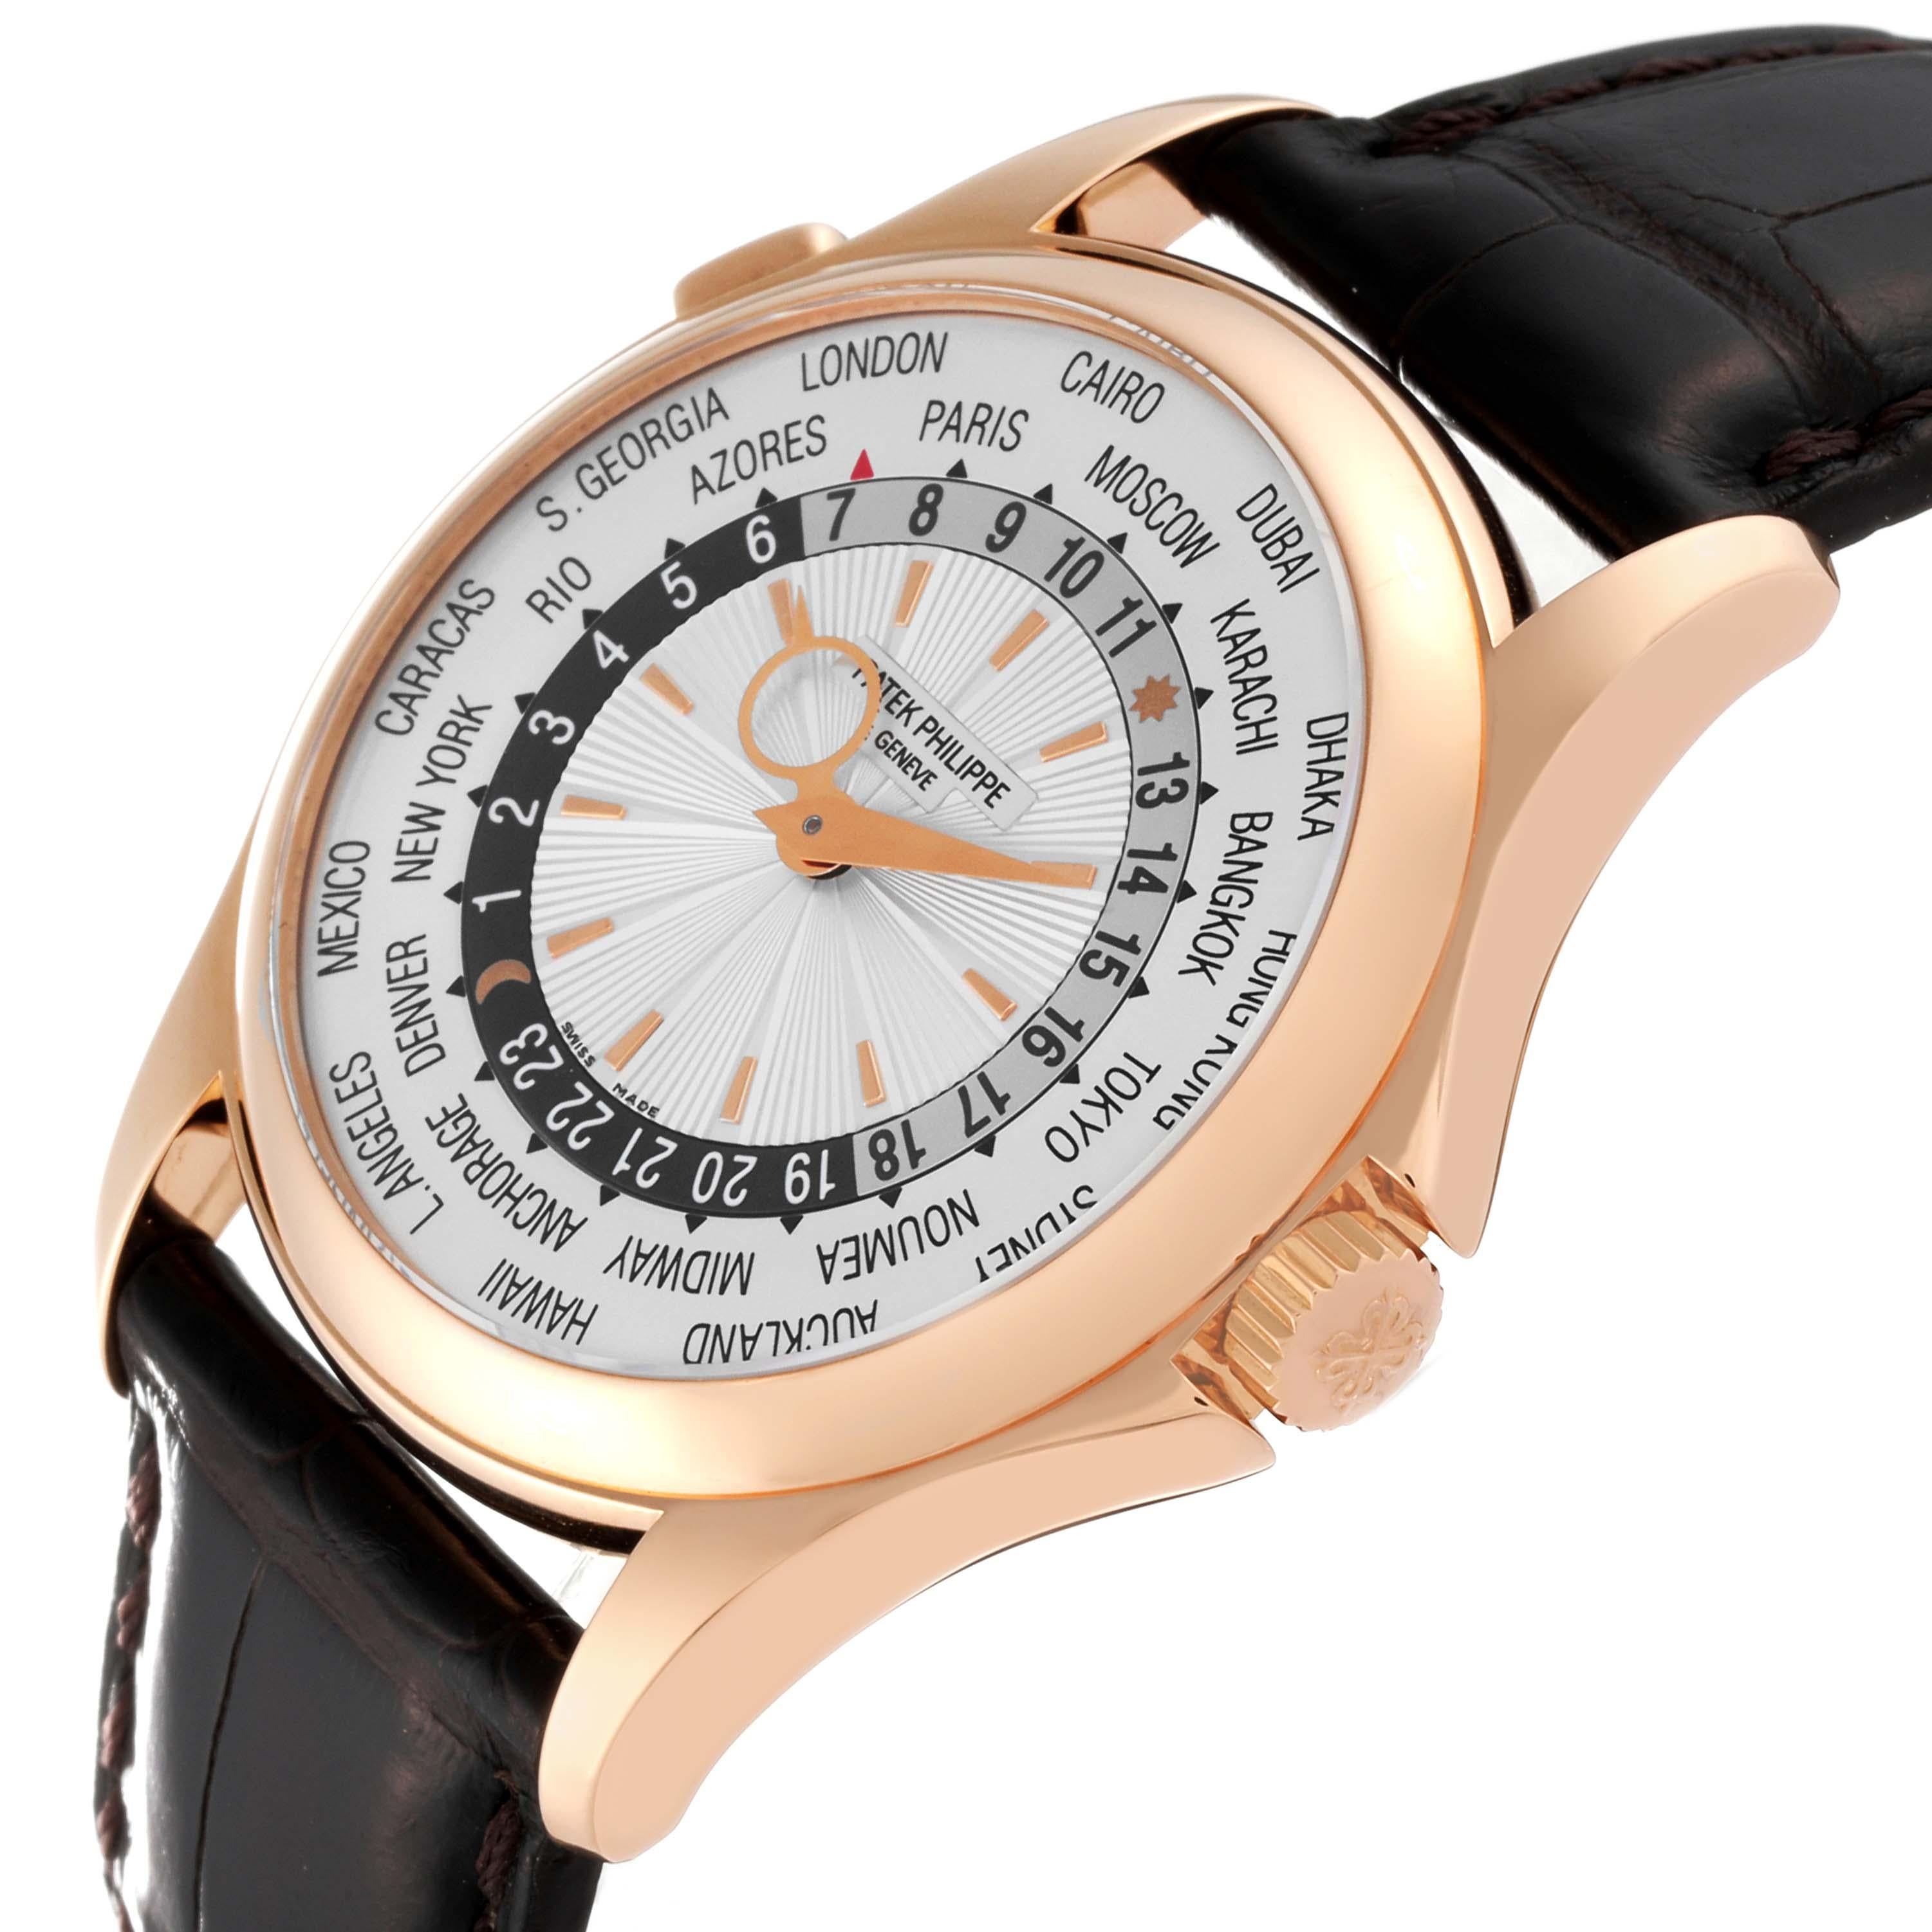 Patek Philippe World Time Complications Rose Gold Mens Watch 5130 For Sale 2